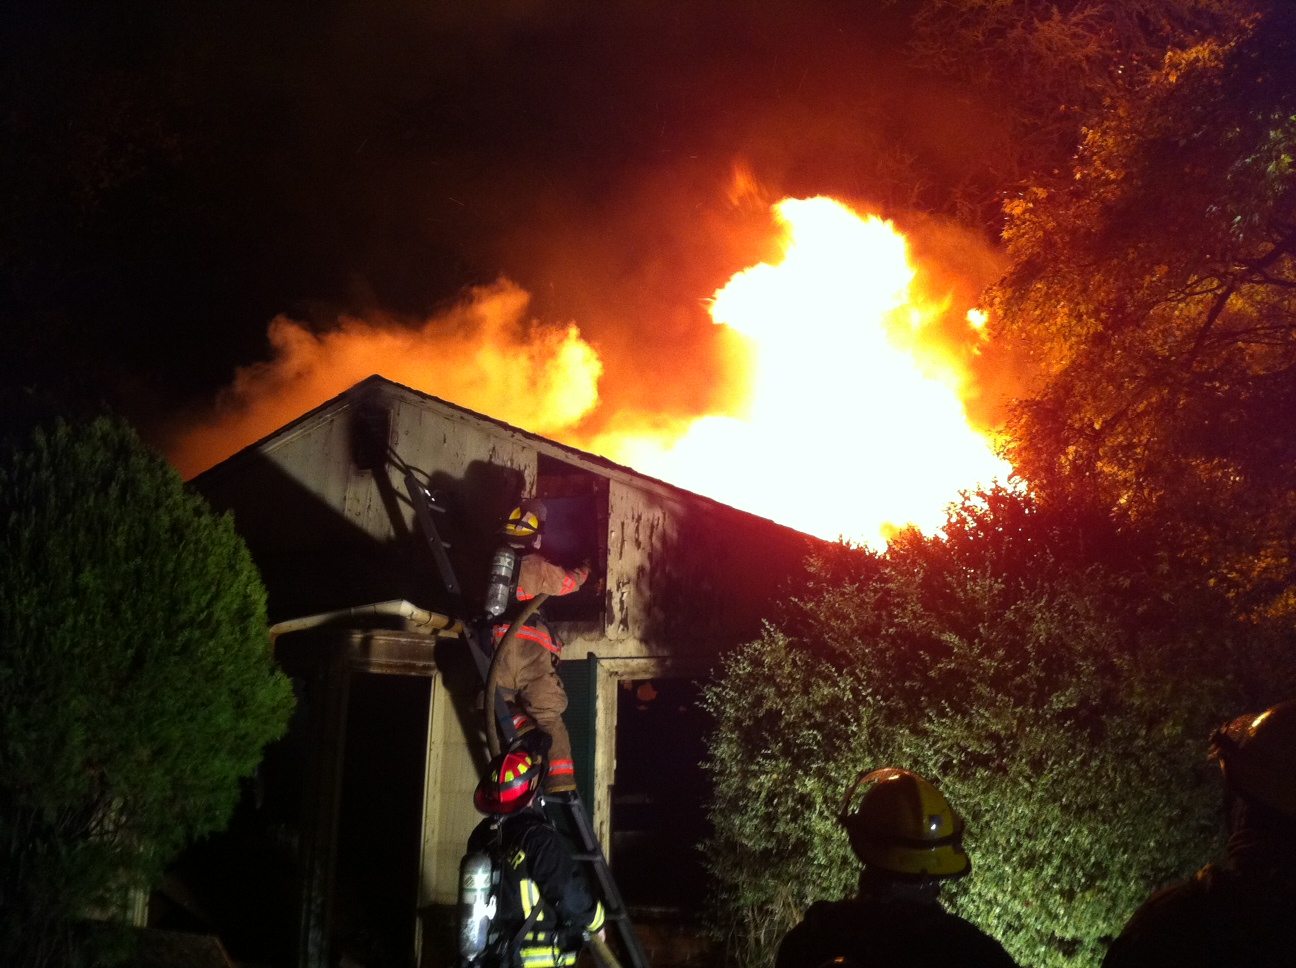 Firefighters battle a fire at an abandoned house at 8116 N.E. 32nd Street in Vancouver on Saturday.